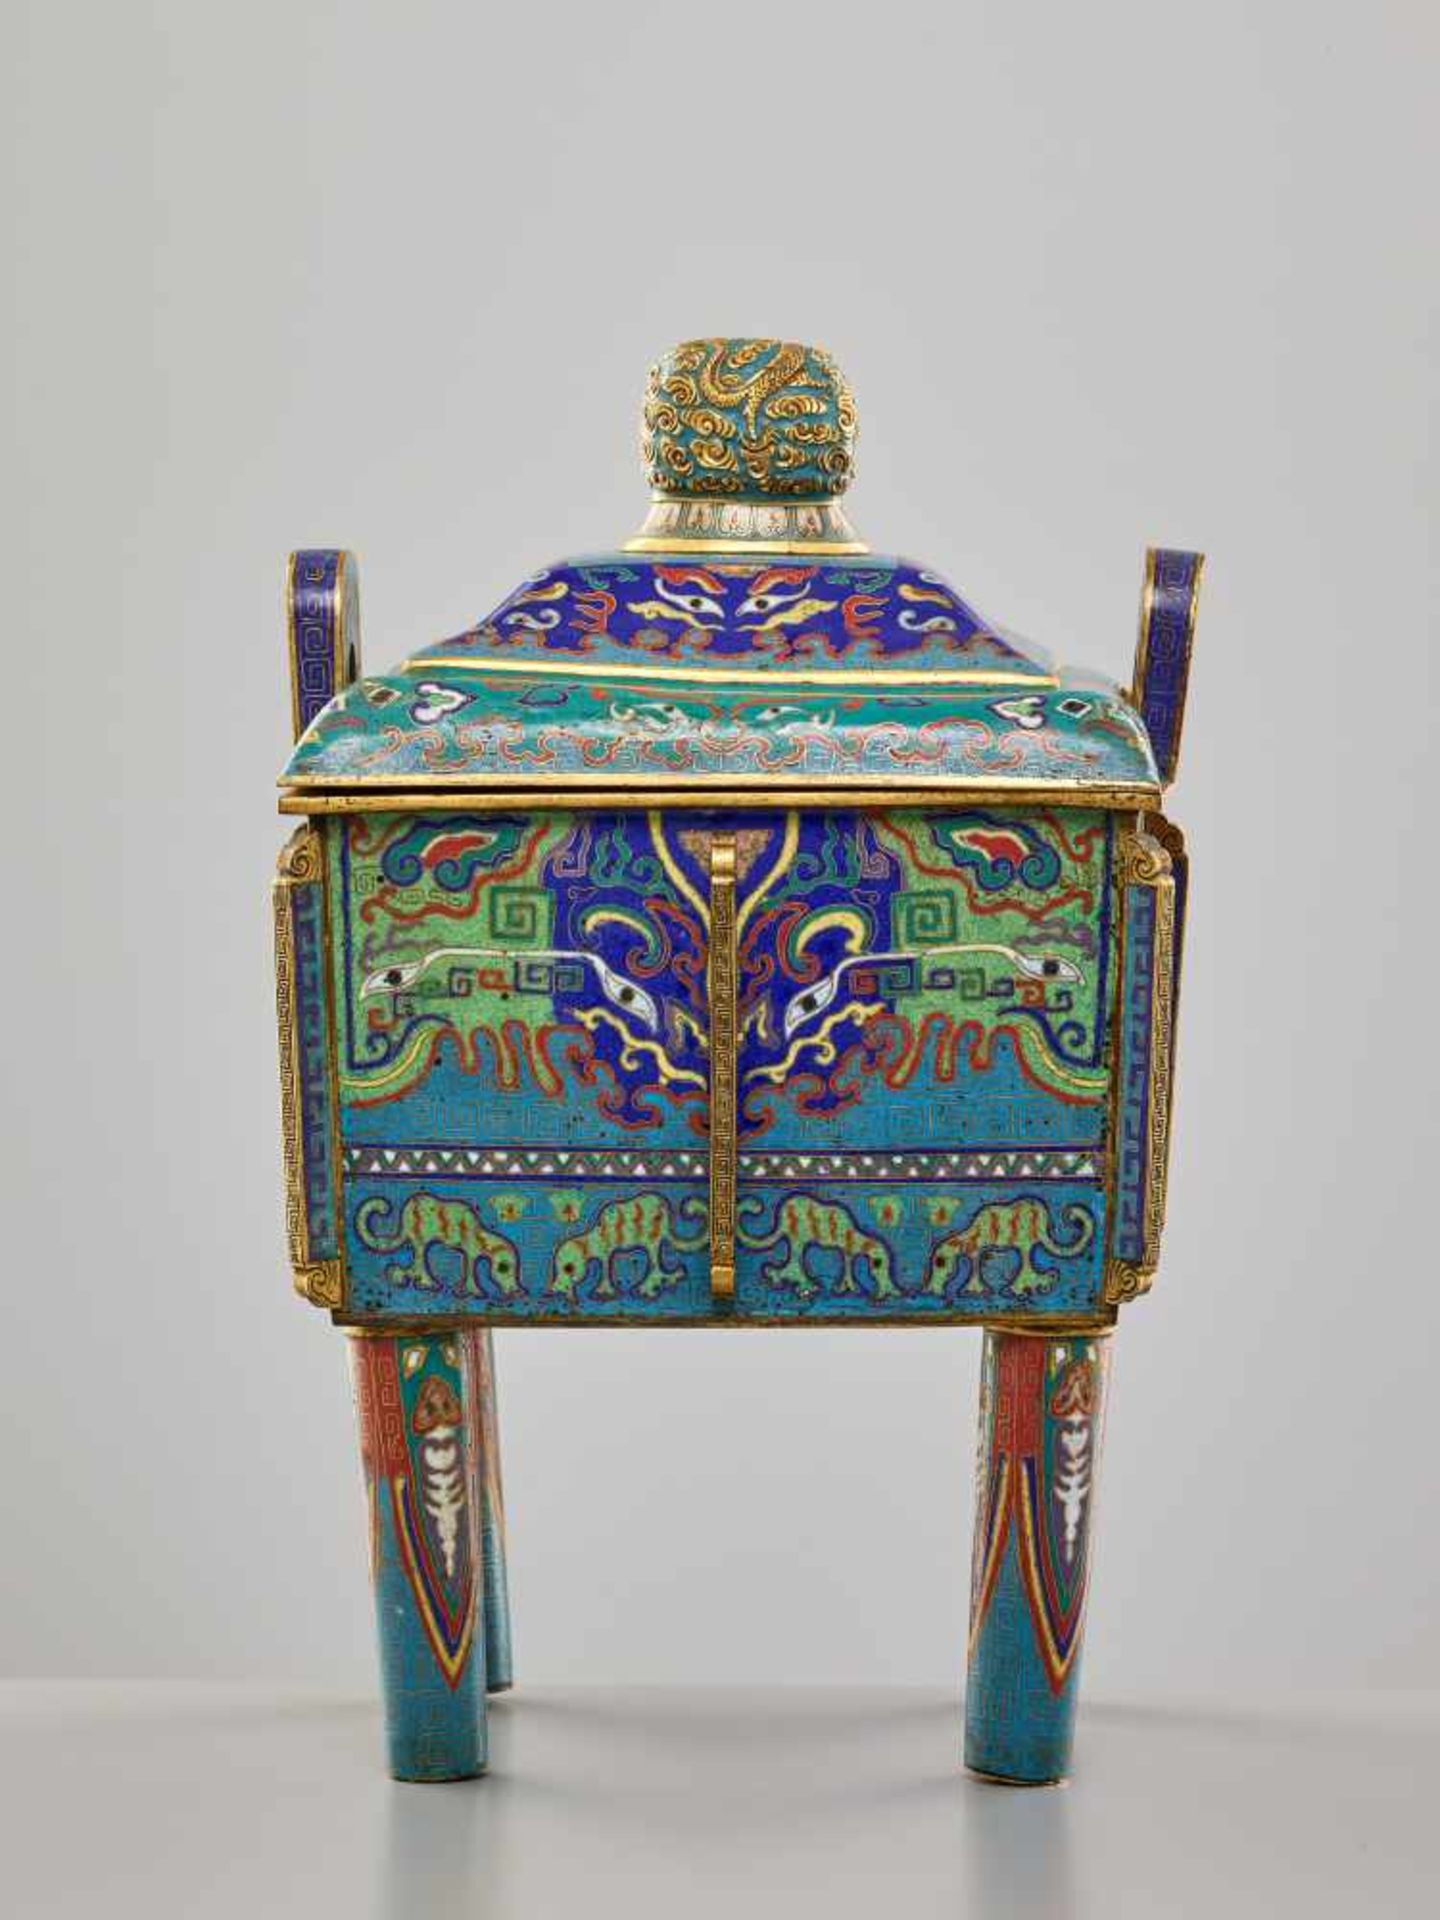 A CLOISONNÉ ENAMEL CENSER AND COVER, FANGDING, QING DYNASTYThe massively cast bronze vessel with - Image 7 of 15